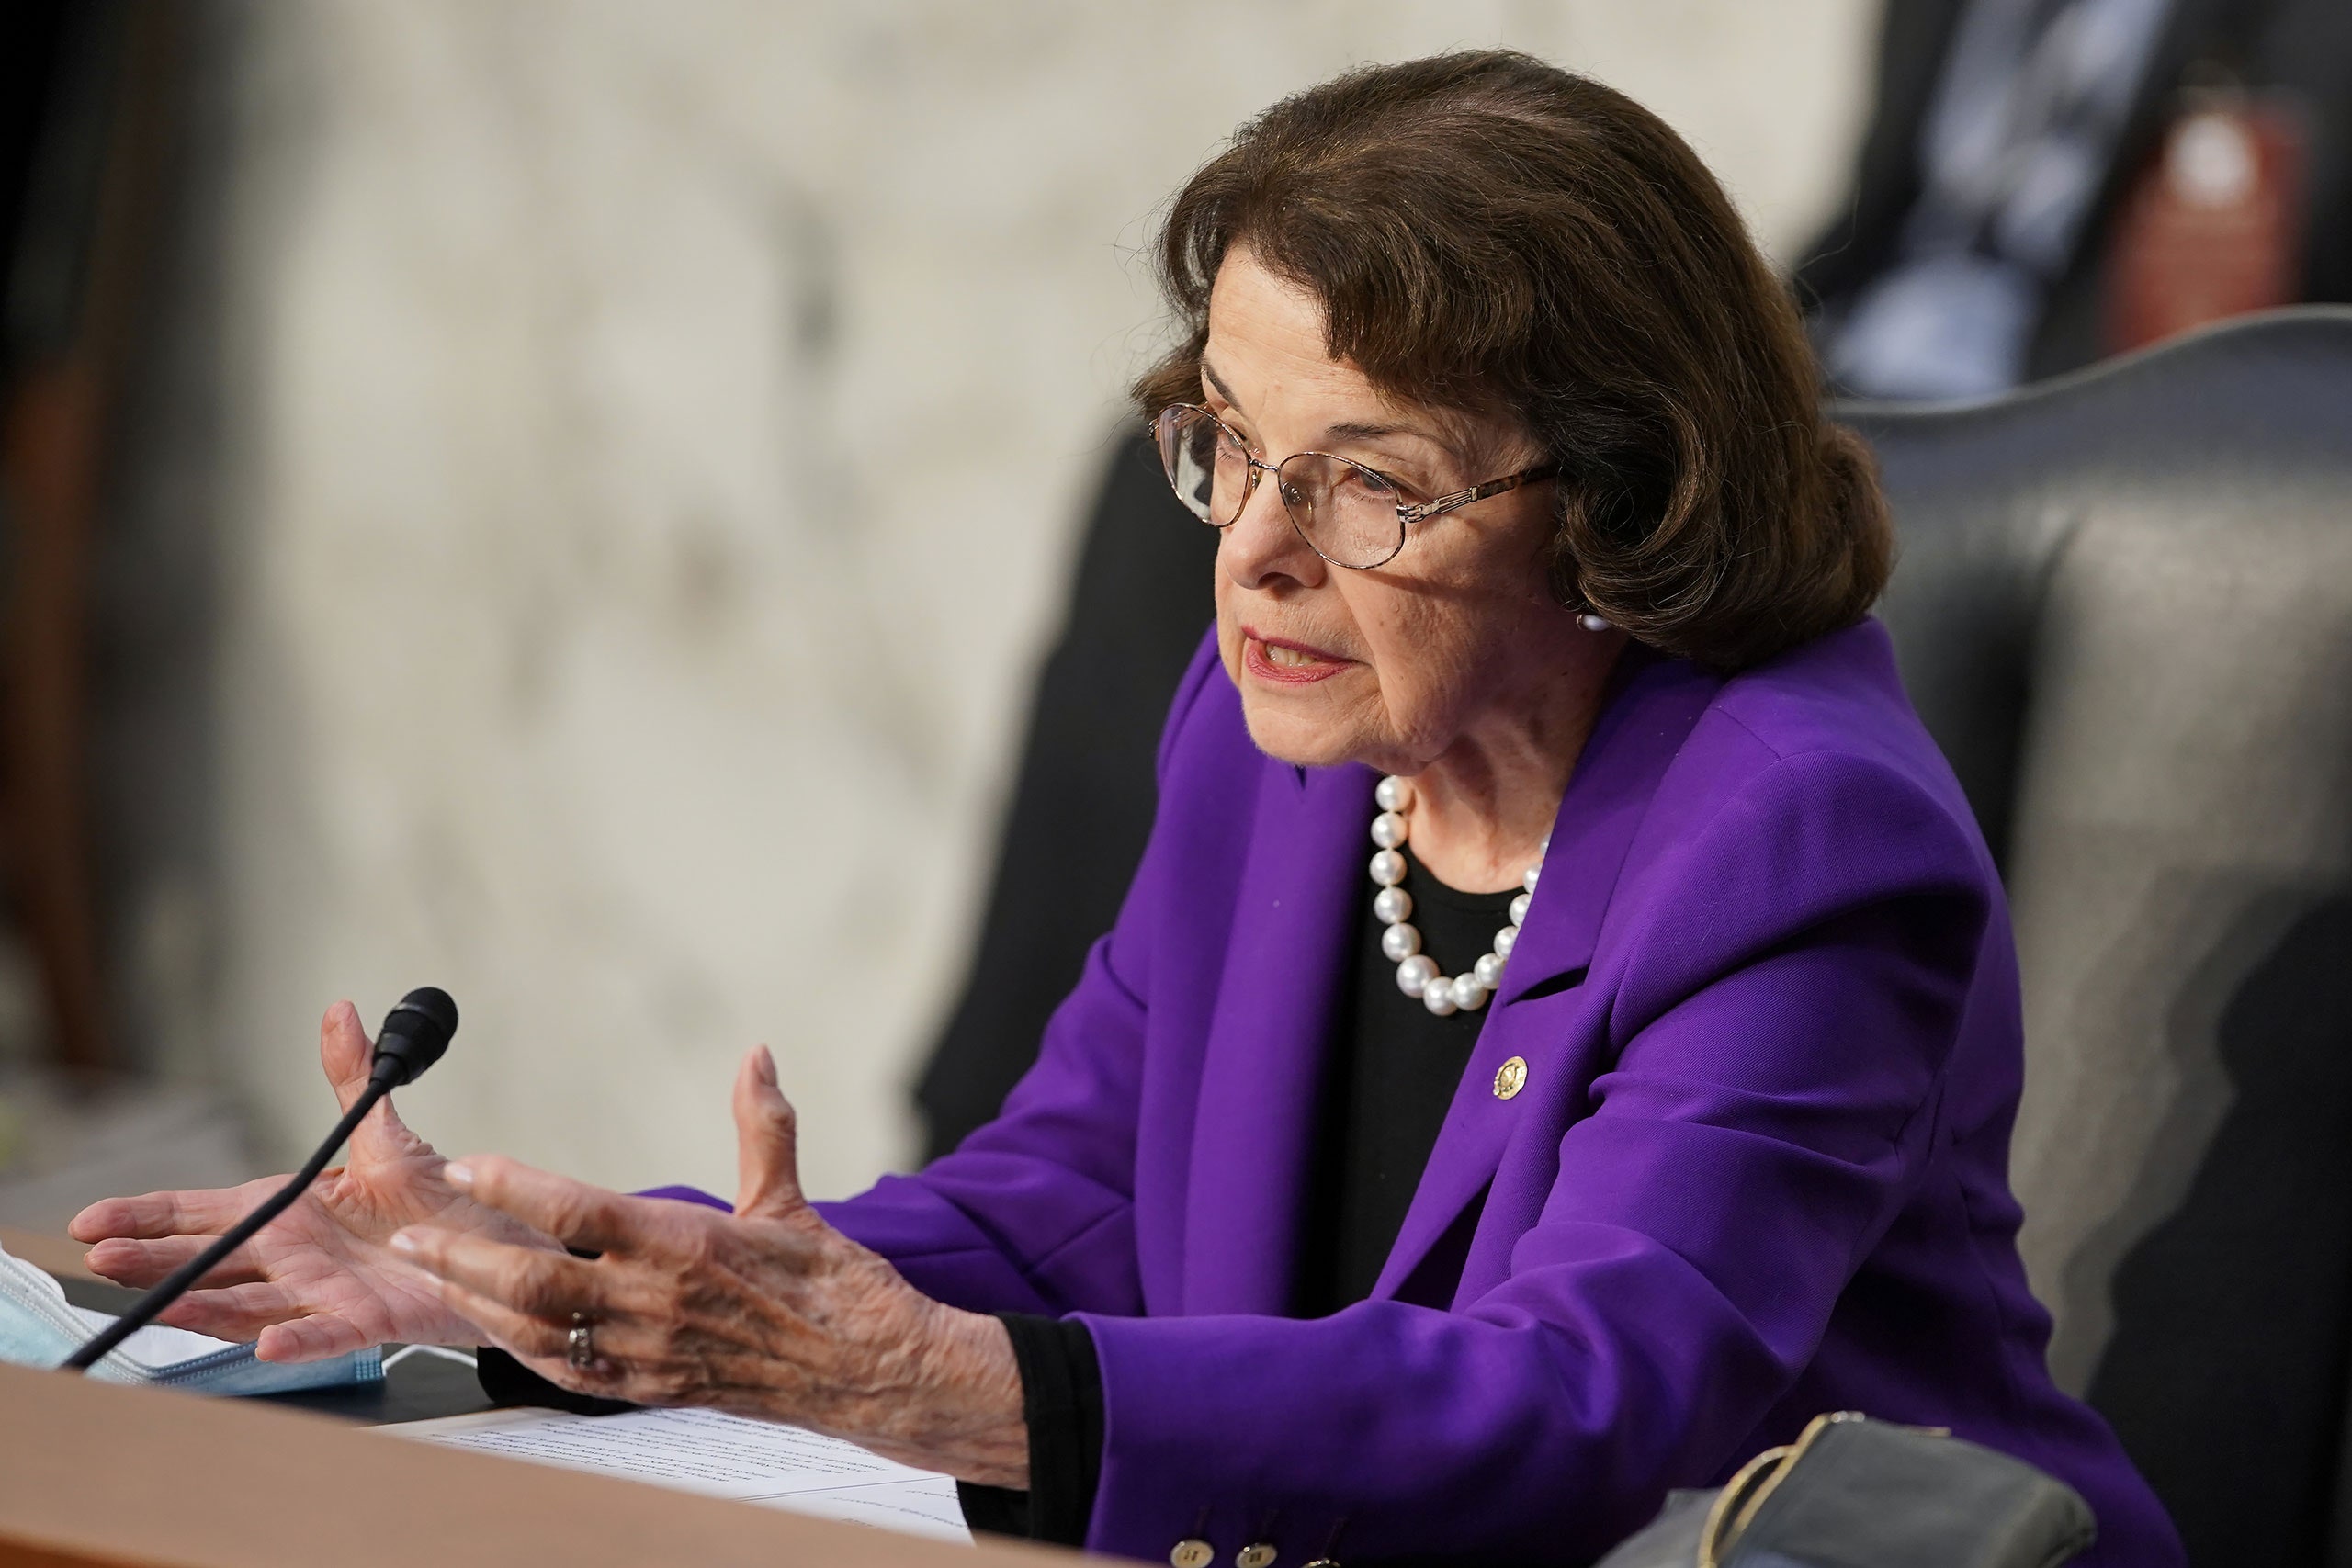 CA Sen. Dianne Feinstein Talks About Her Effort to Repeal DOMA